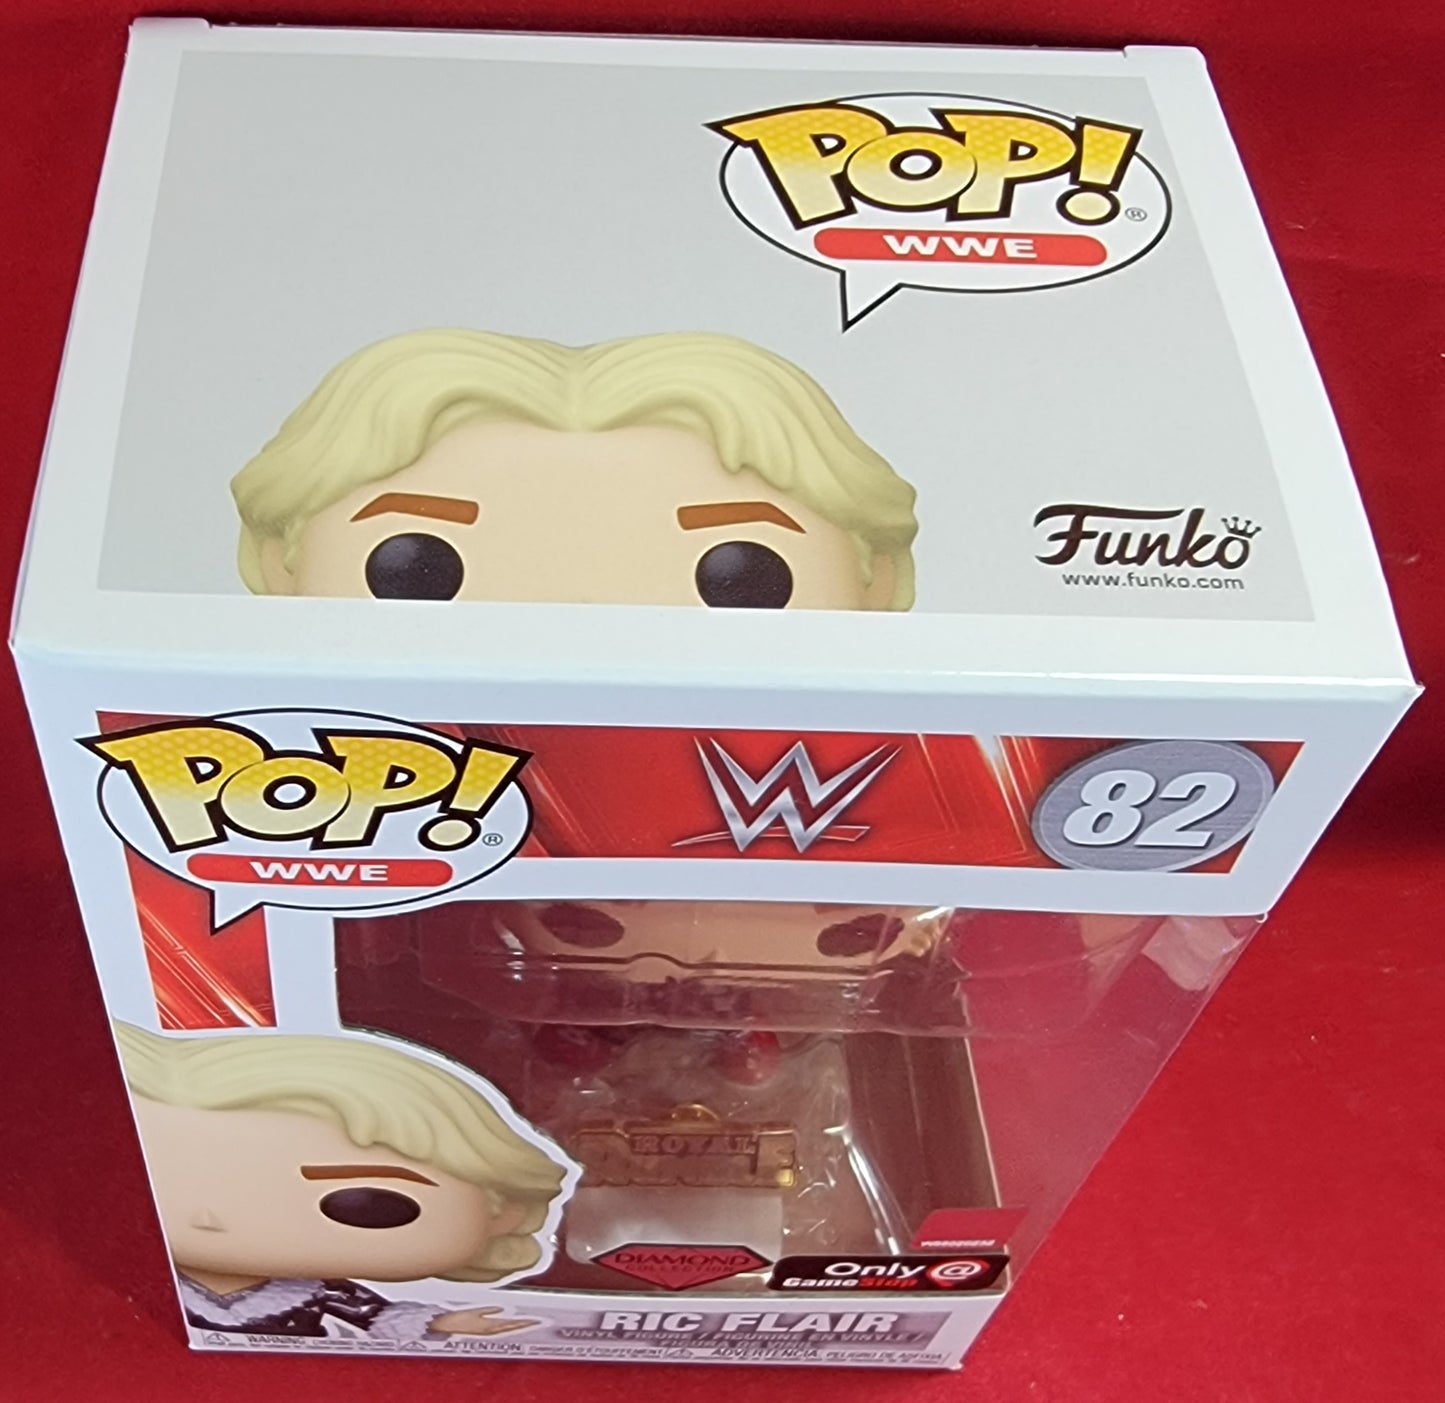 Brand new gamestop ric flair and blind mini